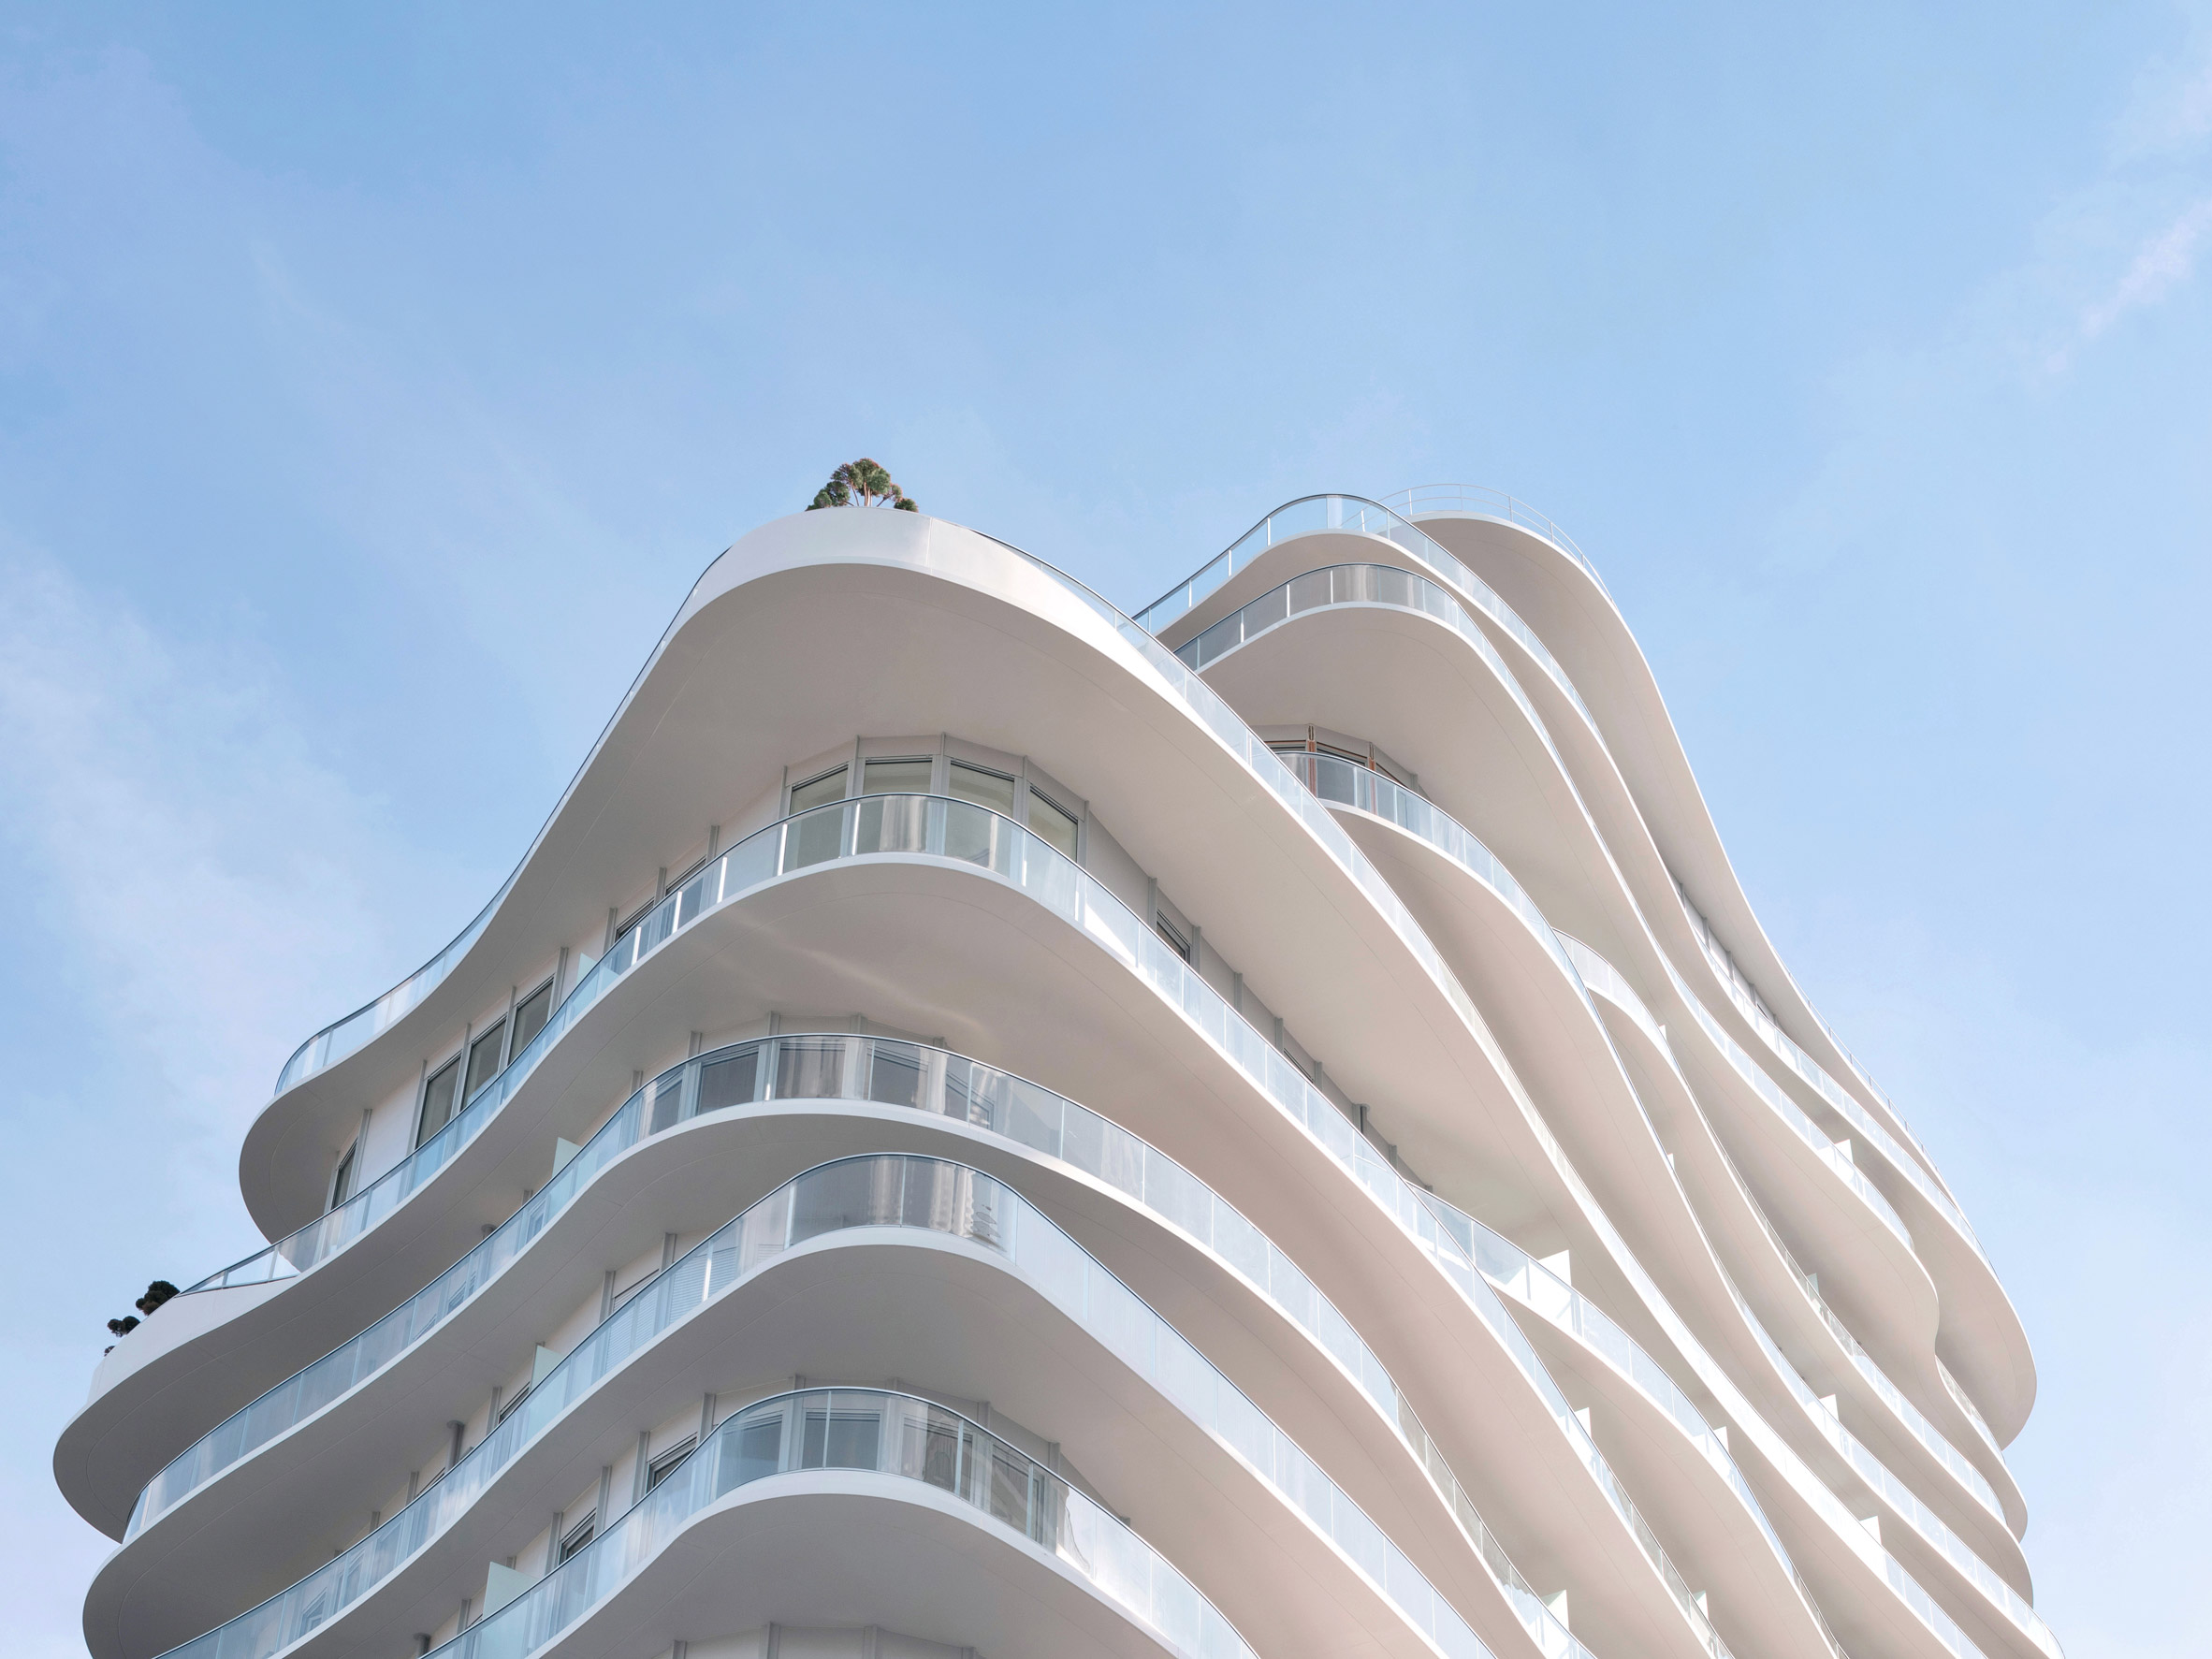 Curved white balconies at Clichy-Batignolles